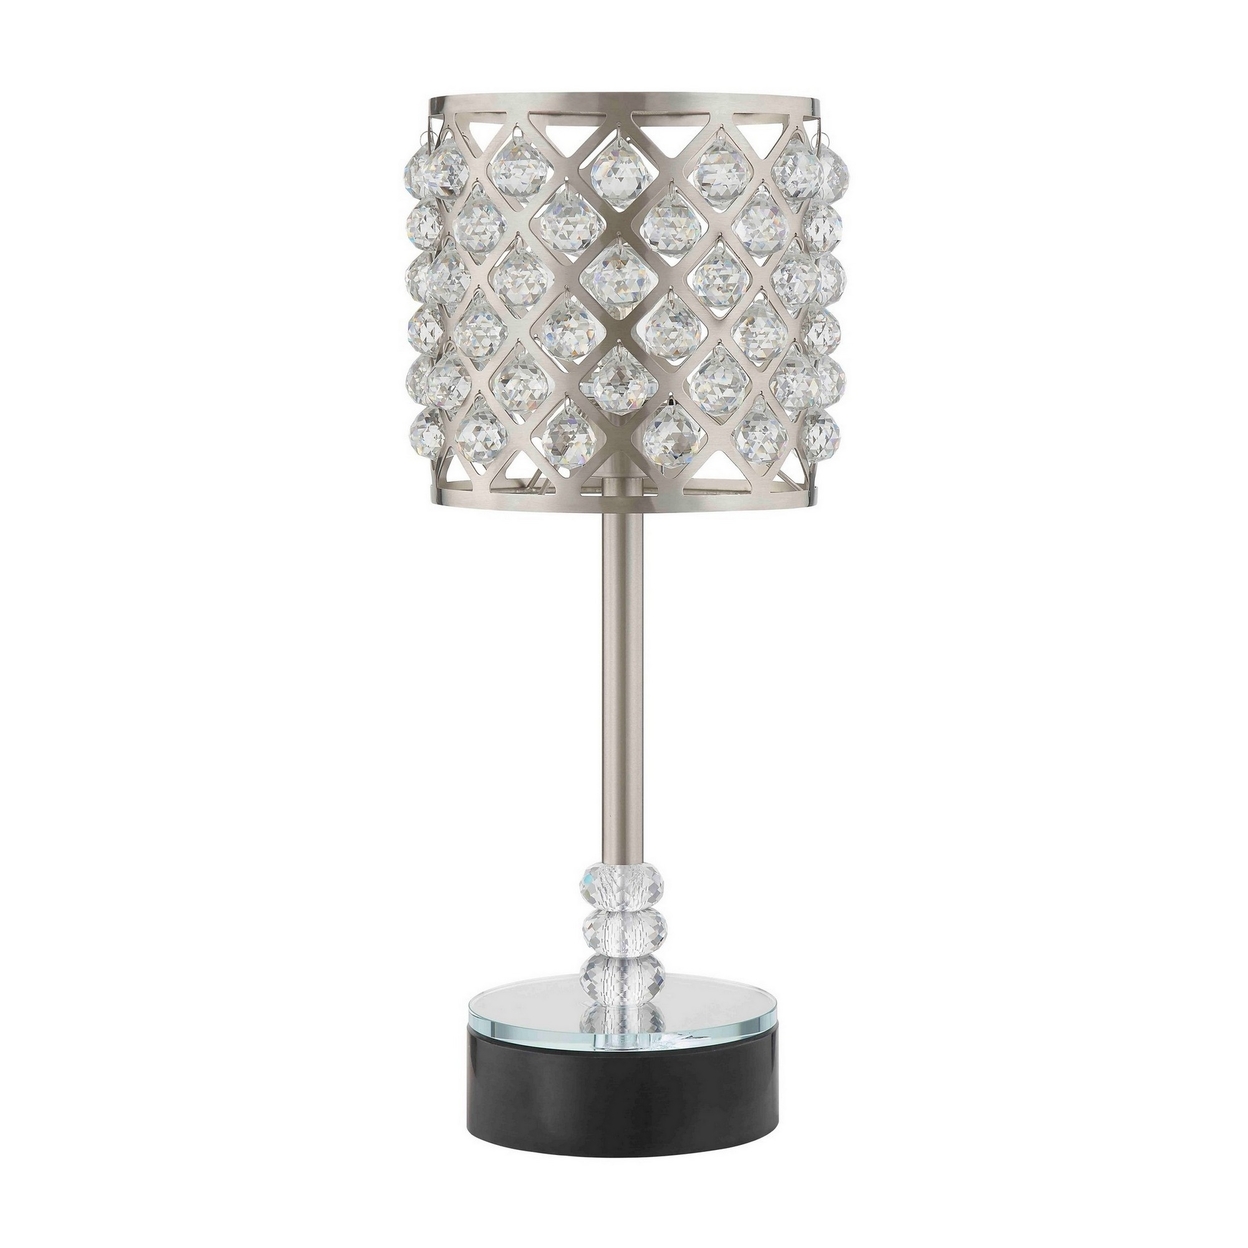 Dany 24 Inch Table Lamp With Crystal Drum Shade, Metal, Brushed Nickel -Saltoro Sherpi